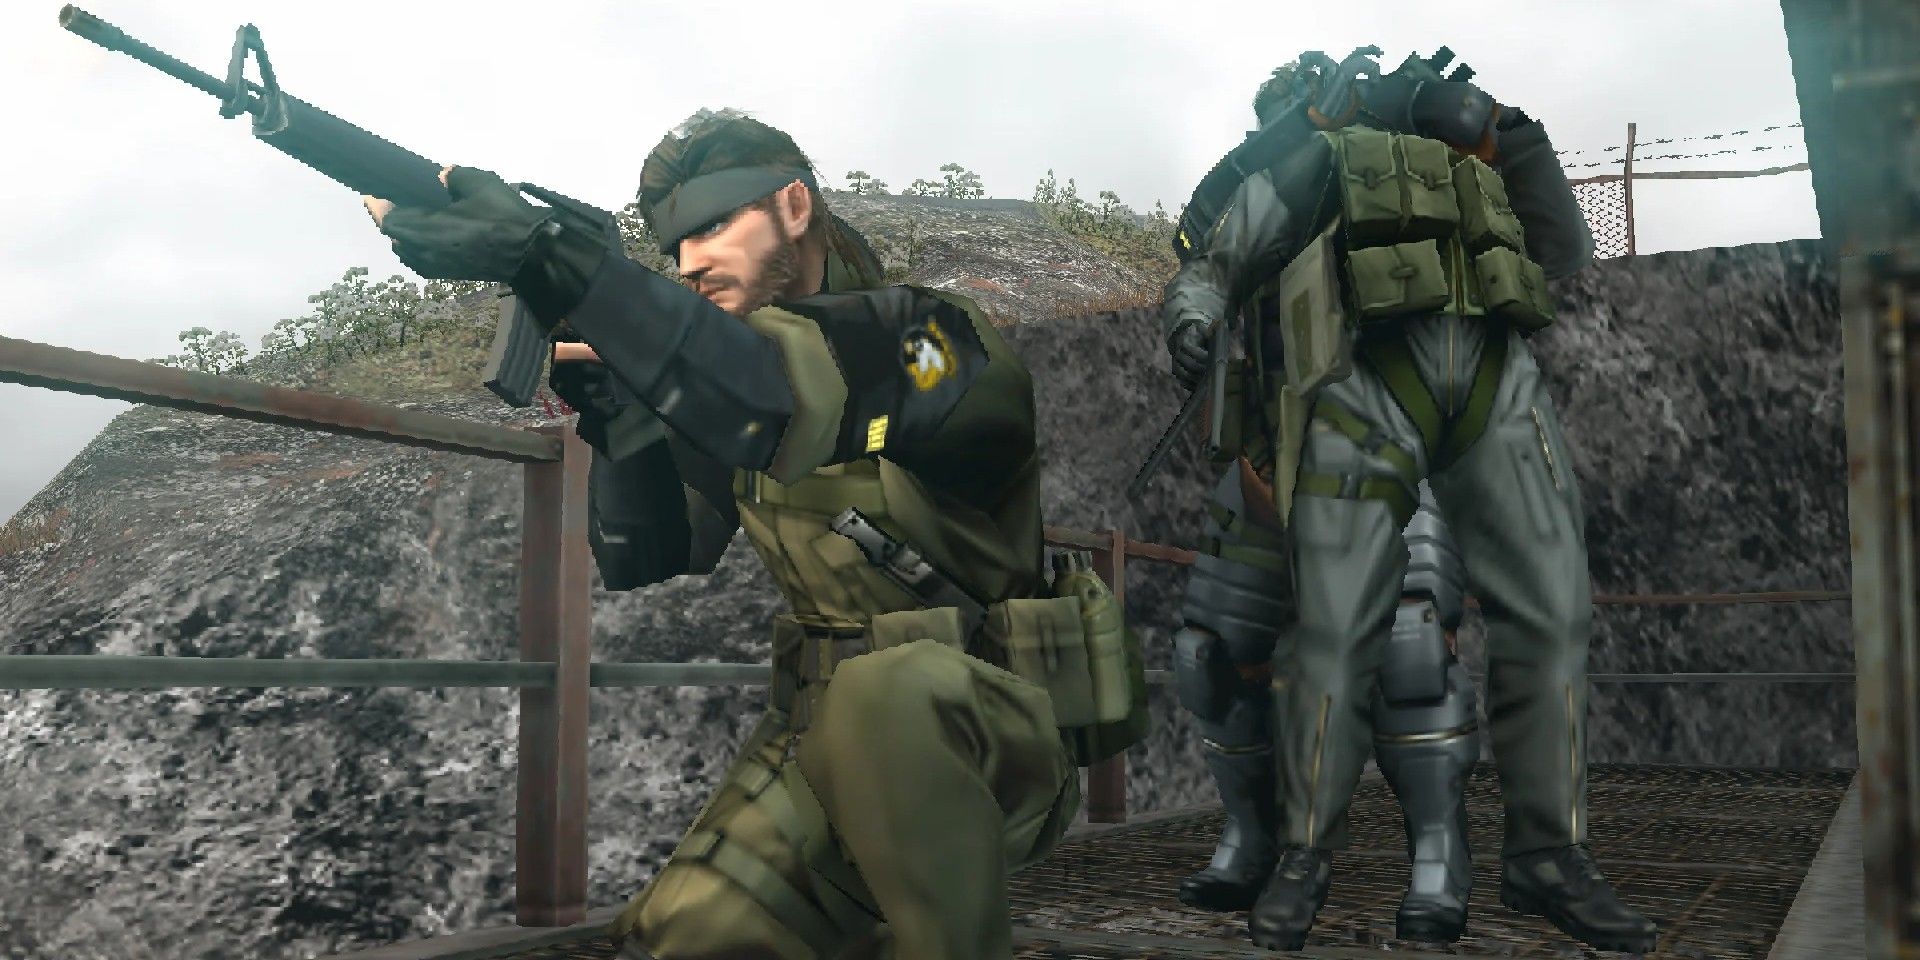 Metal Gear Solid Peace Walker screenshot Of One Player Choking Guard While Another Aims Their Guns